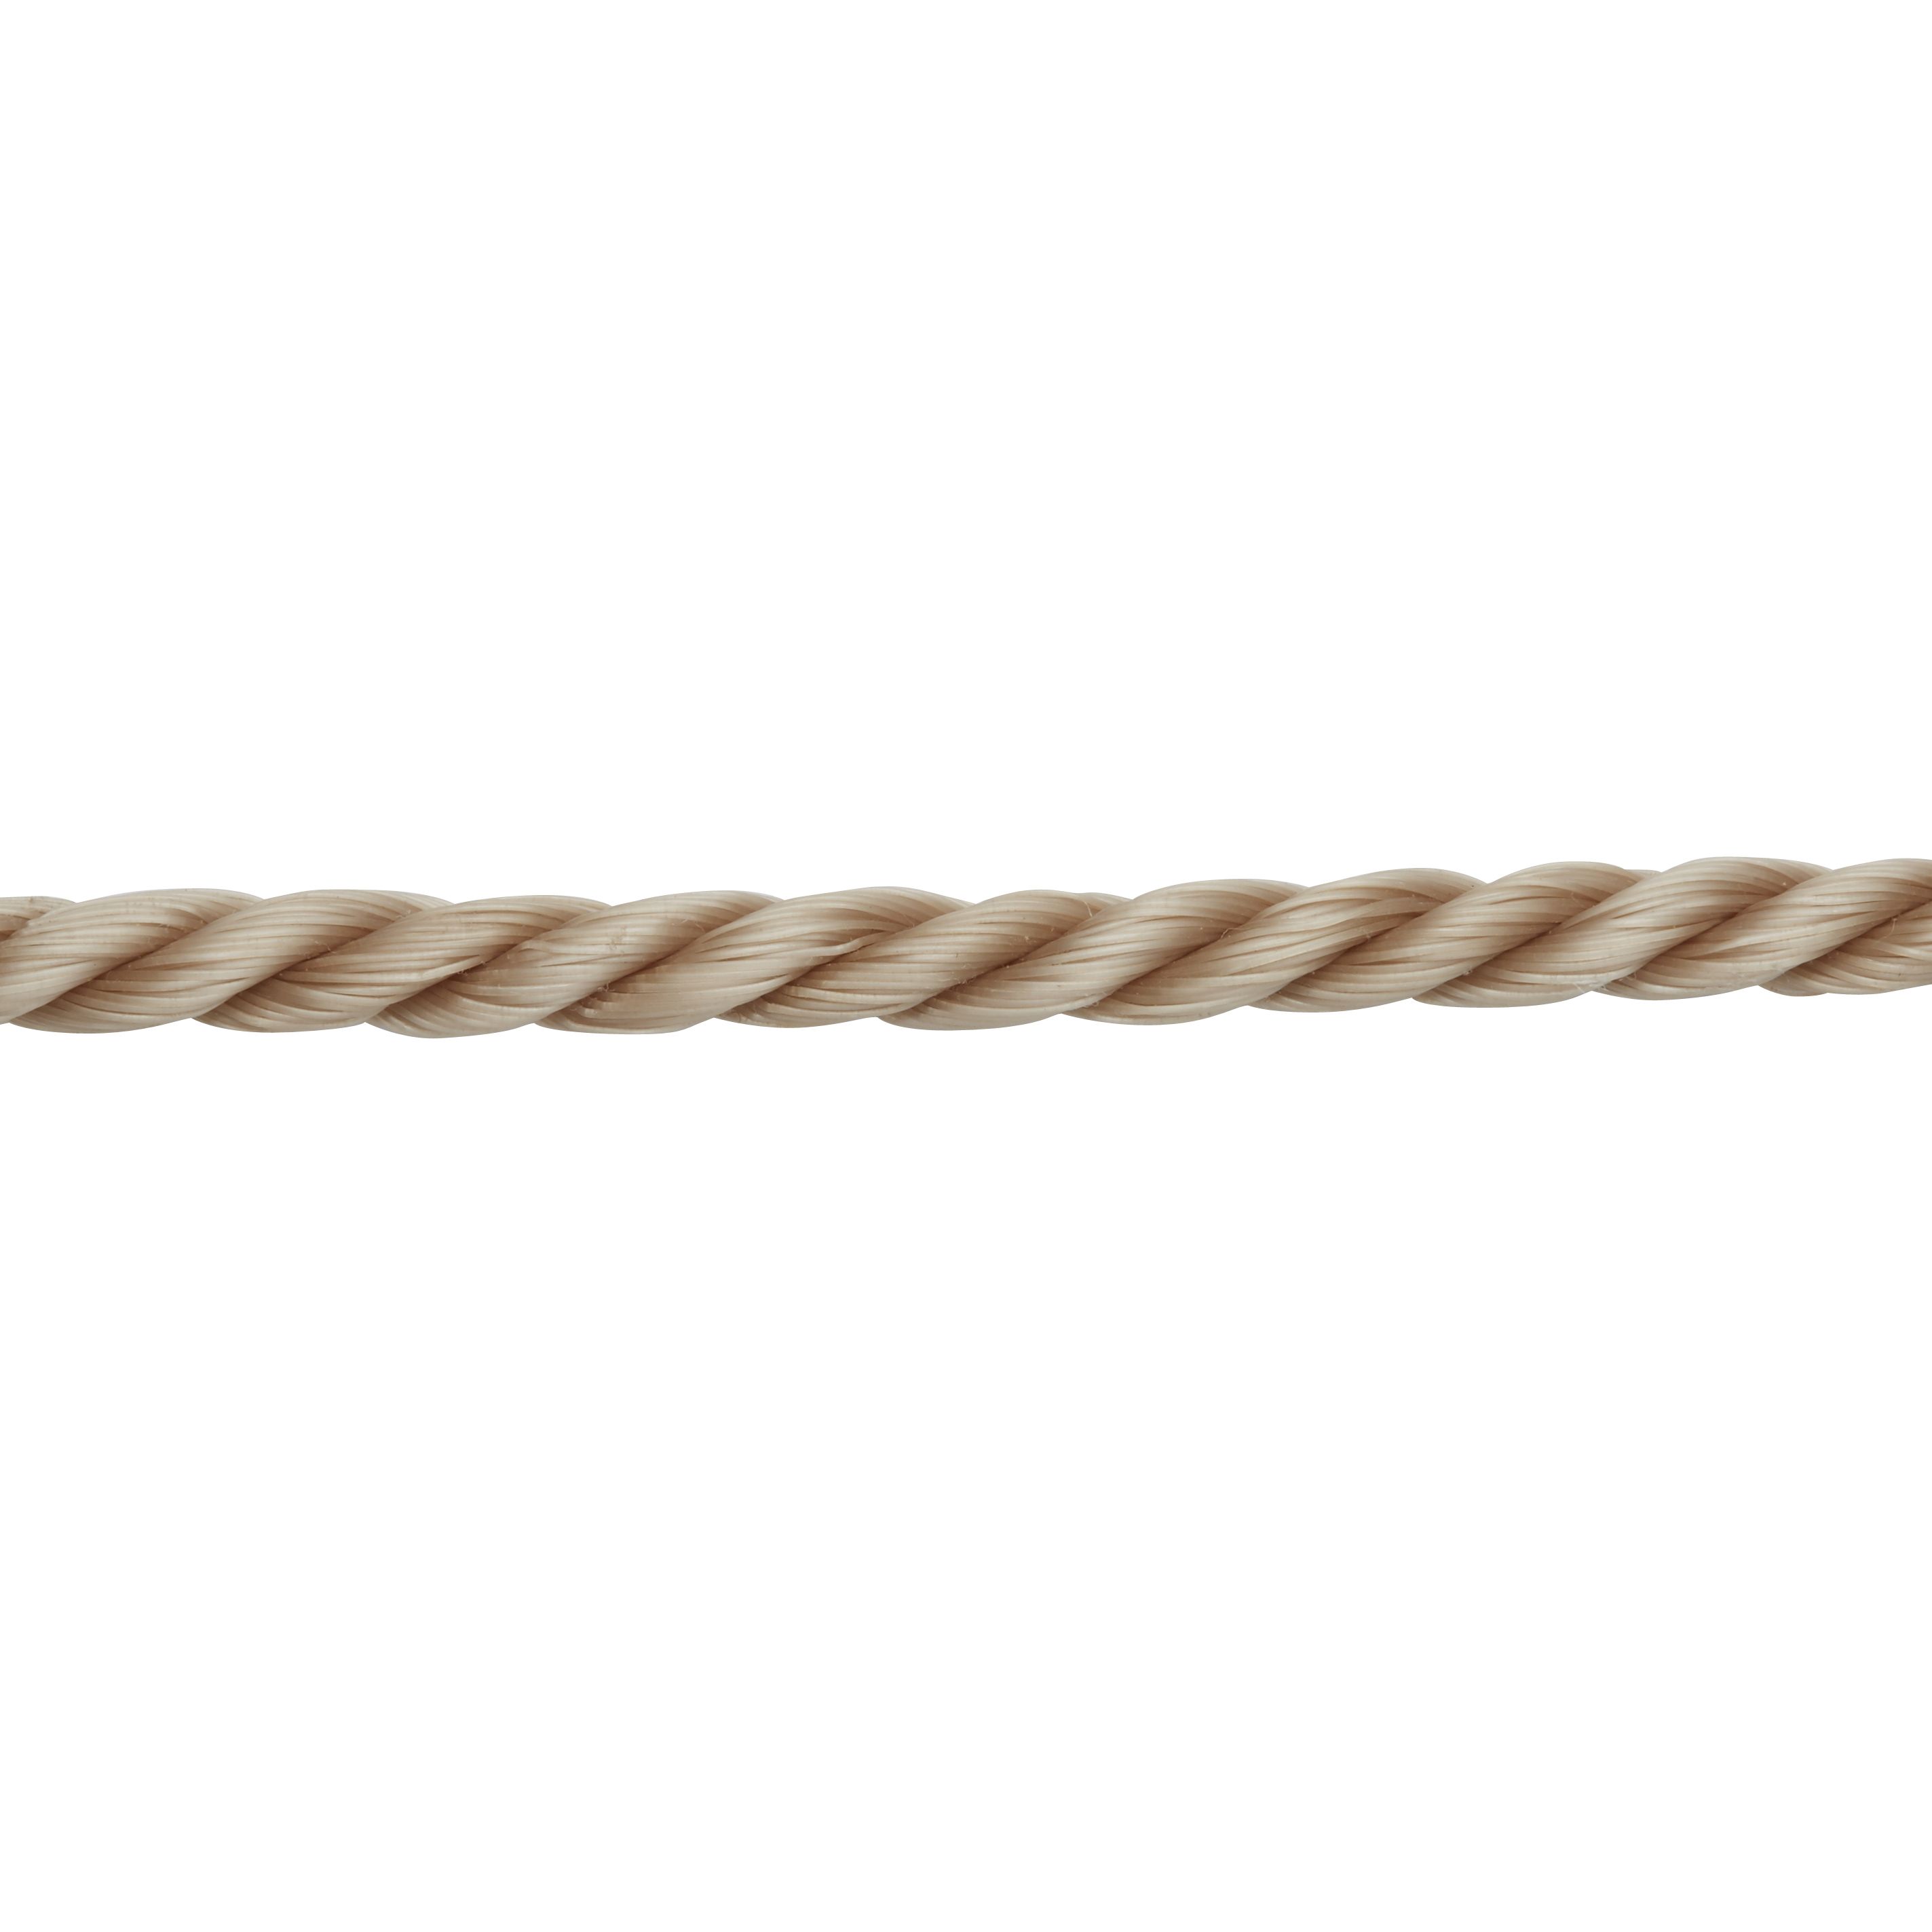 Diall Beige Polypropylene (PP) Twisted rope, (L)10m (Dia)6mm